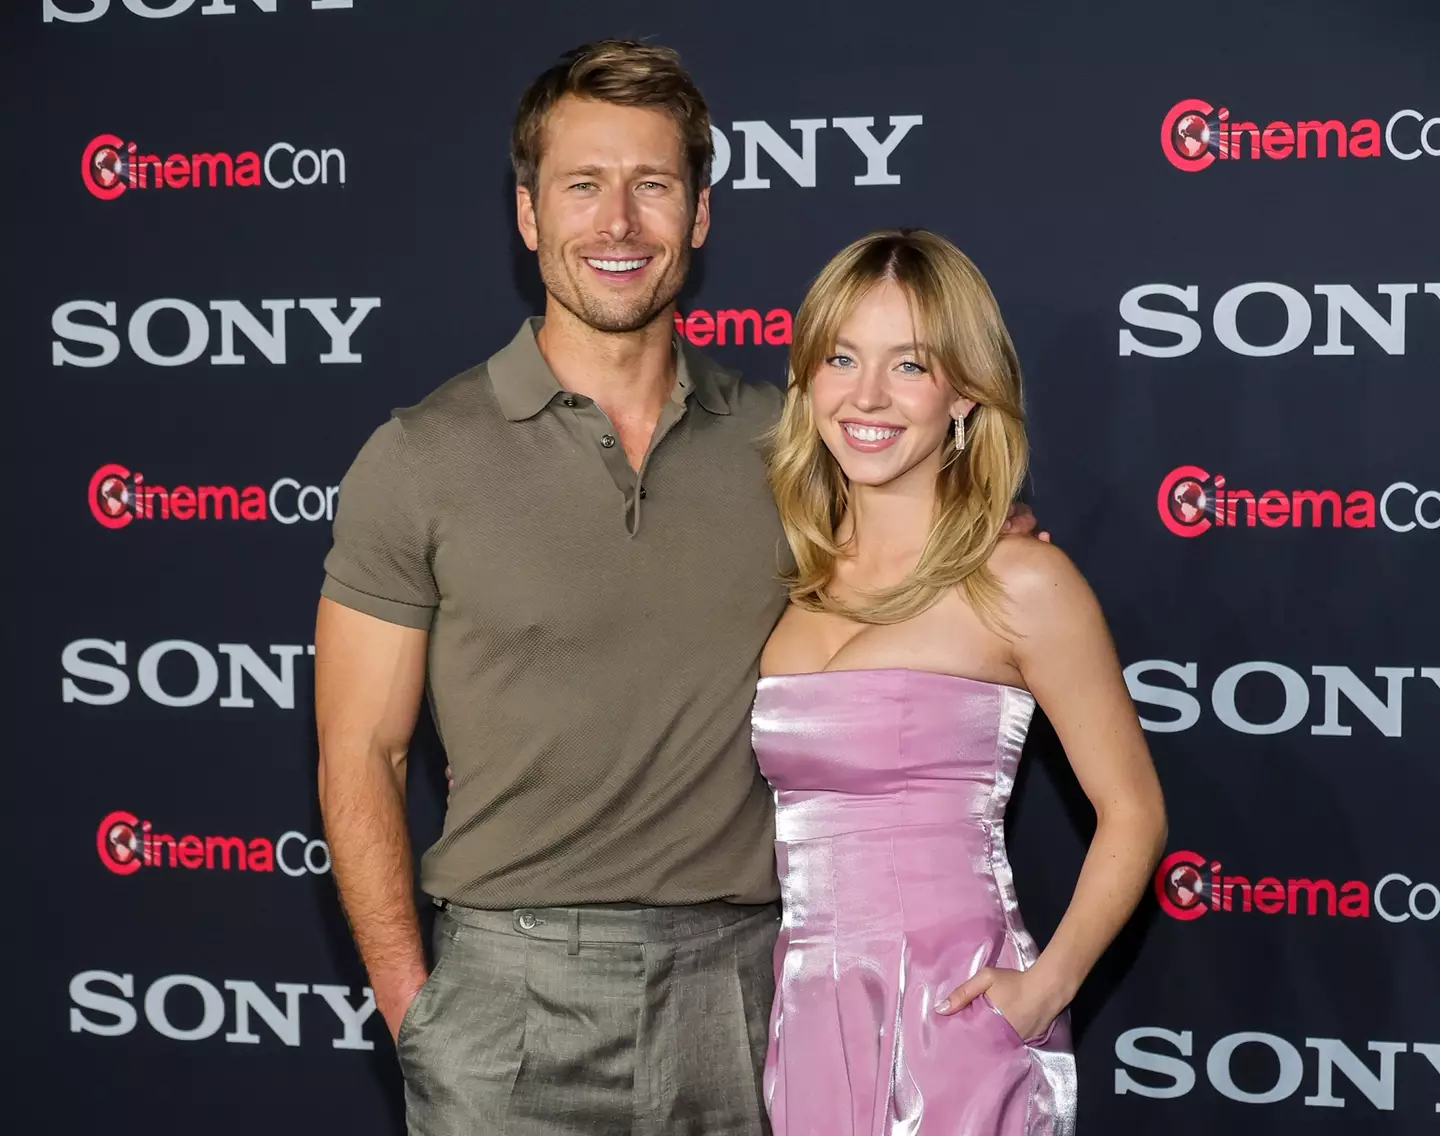 Rumors have been circulating that Sydney Sweeney and Glen Powell could be more than friends.